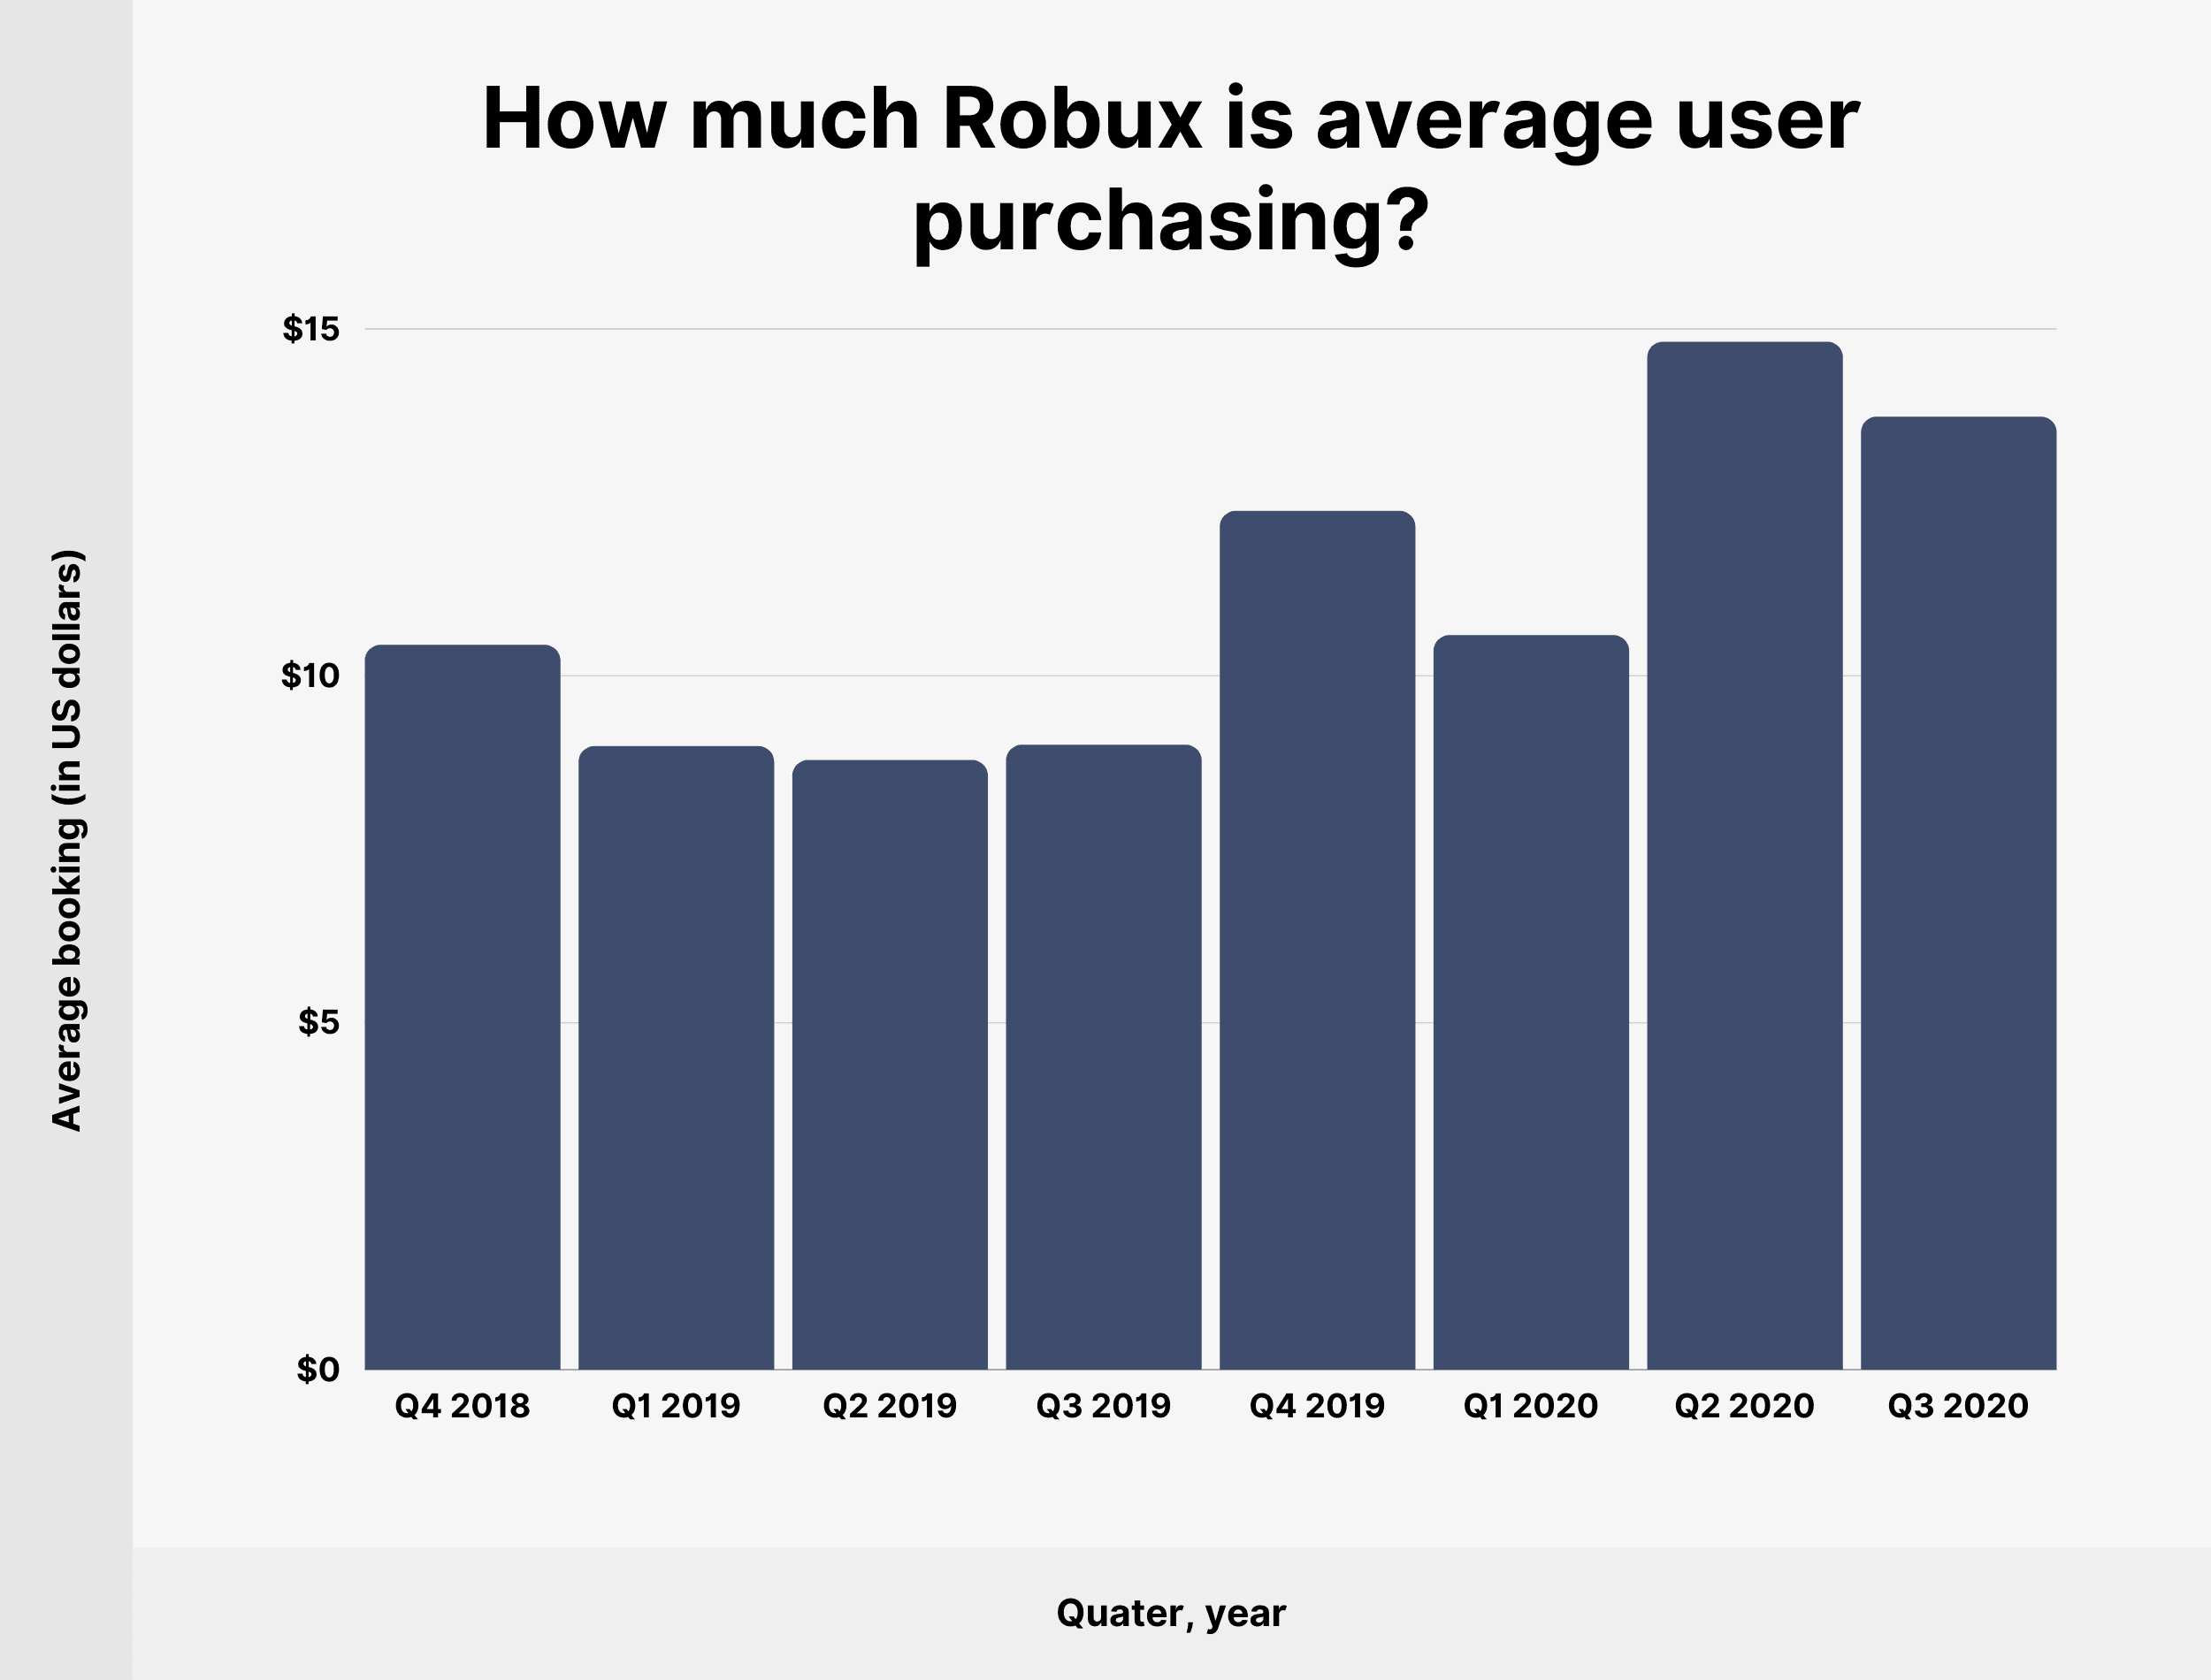 How much Robux is average user purchasing?